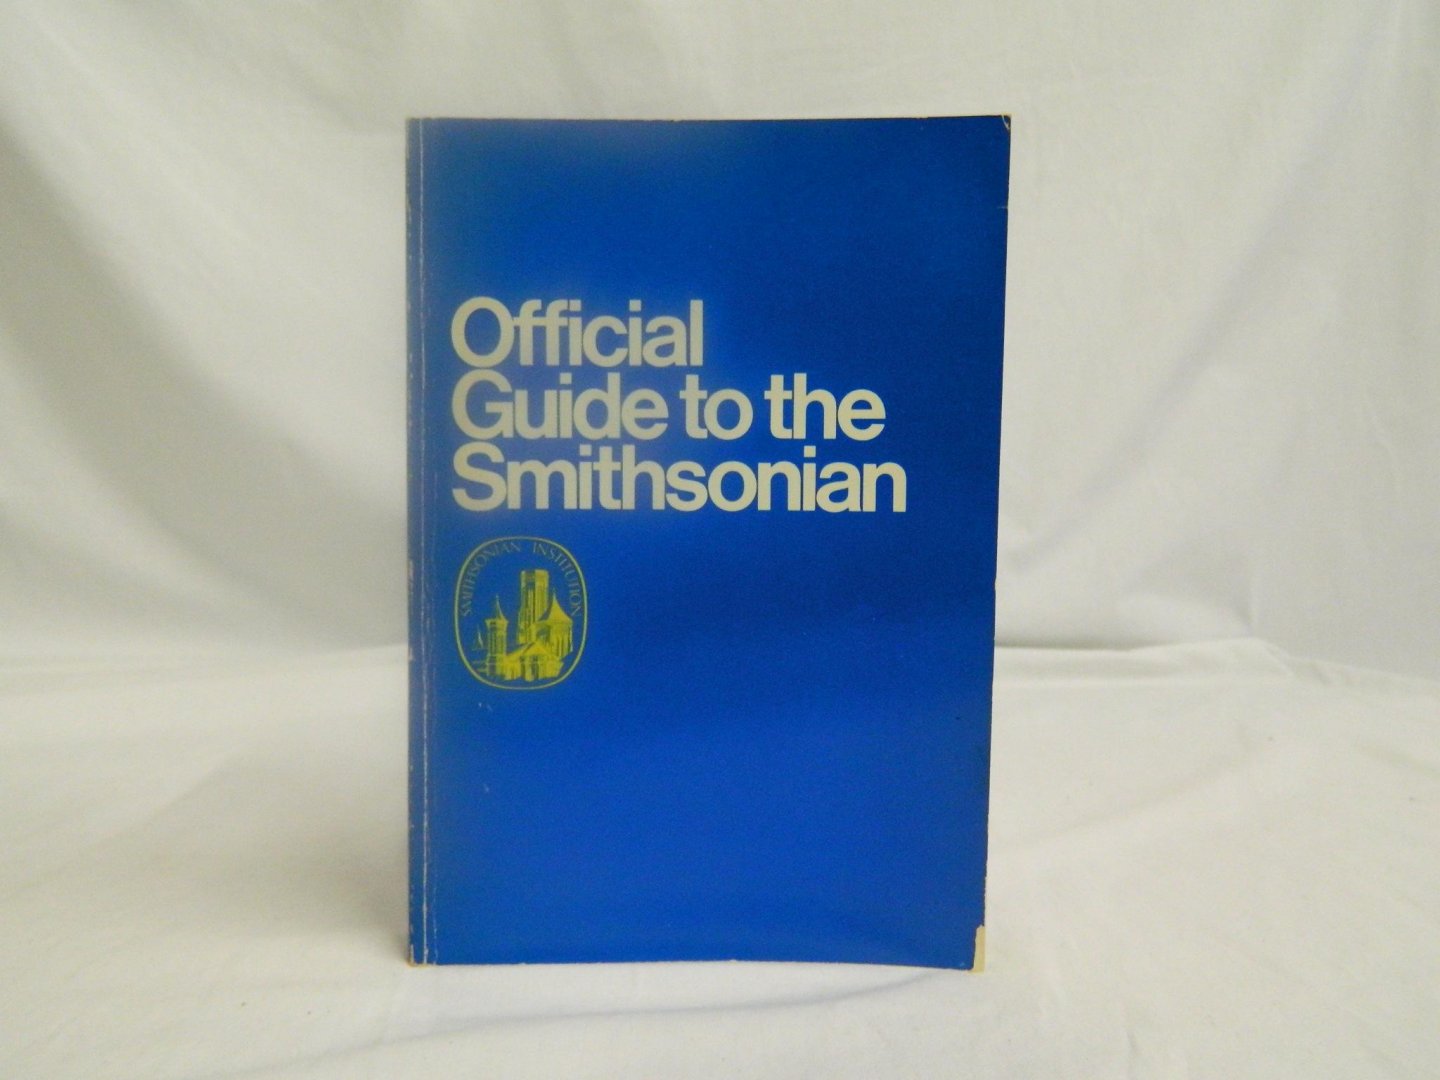 Diversen - Official guide to the Smithsonian